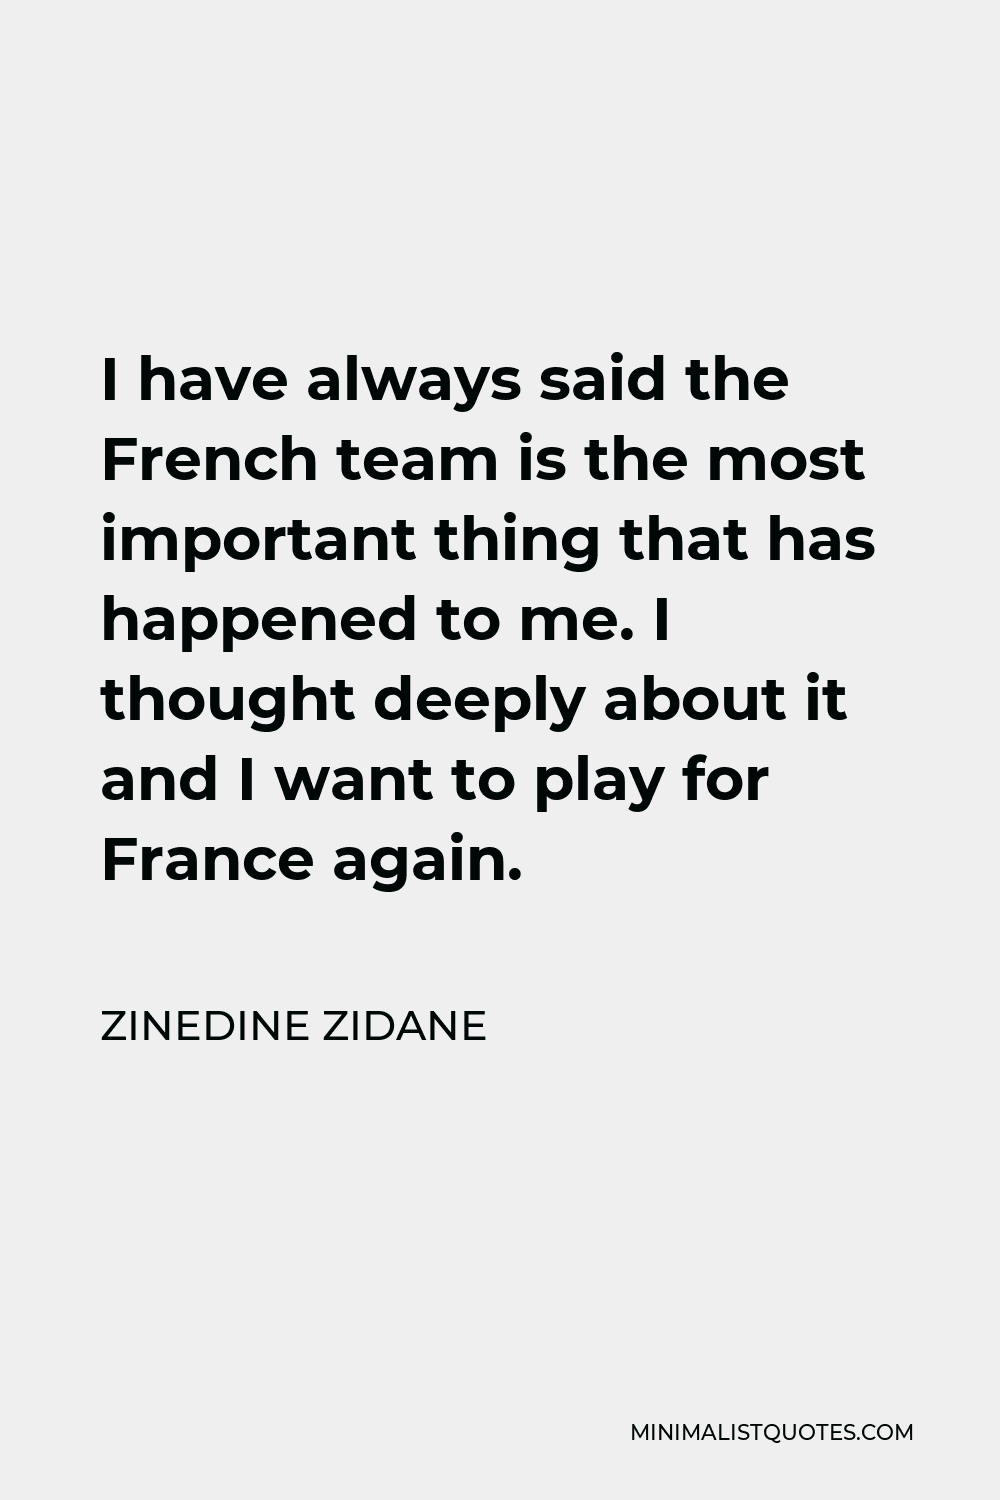 Zinedine Zidane Quote - I have always said the French team is the most important thing that has happened to me. I thought deeply about it and I want to play for France again.